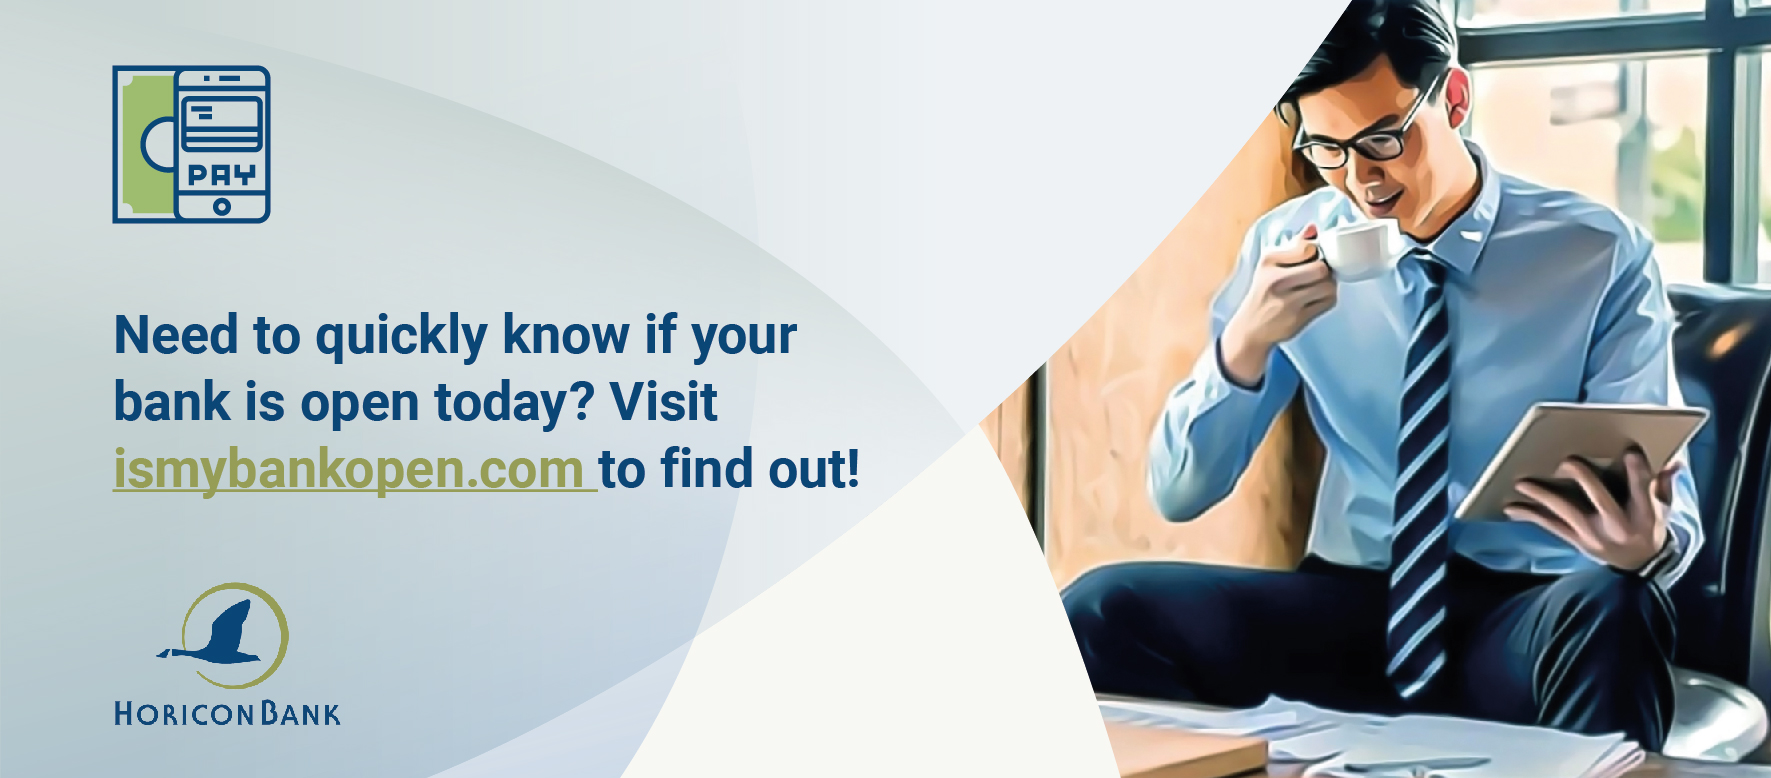 Visit ismybankopen.com to find out if your bank is open today!